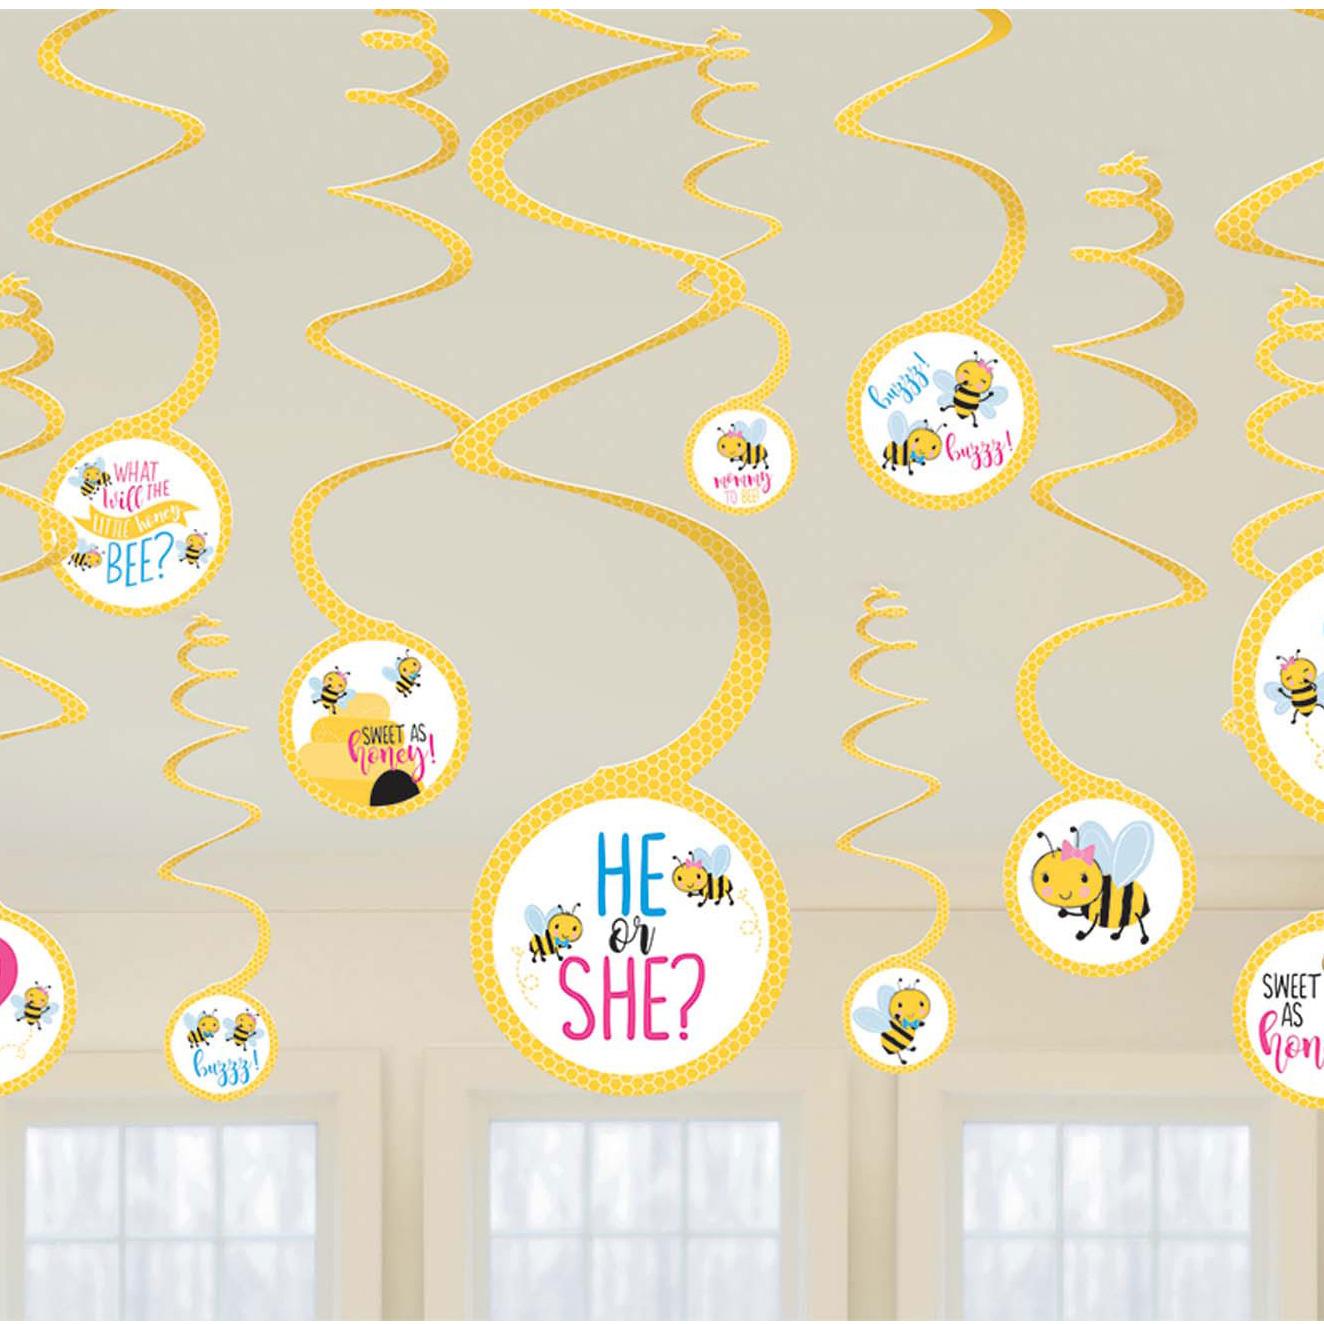 What Will It Bee? Swirl Decorations 12pcs